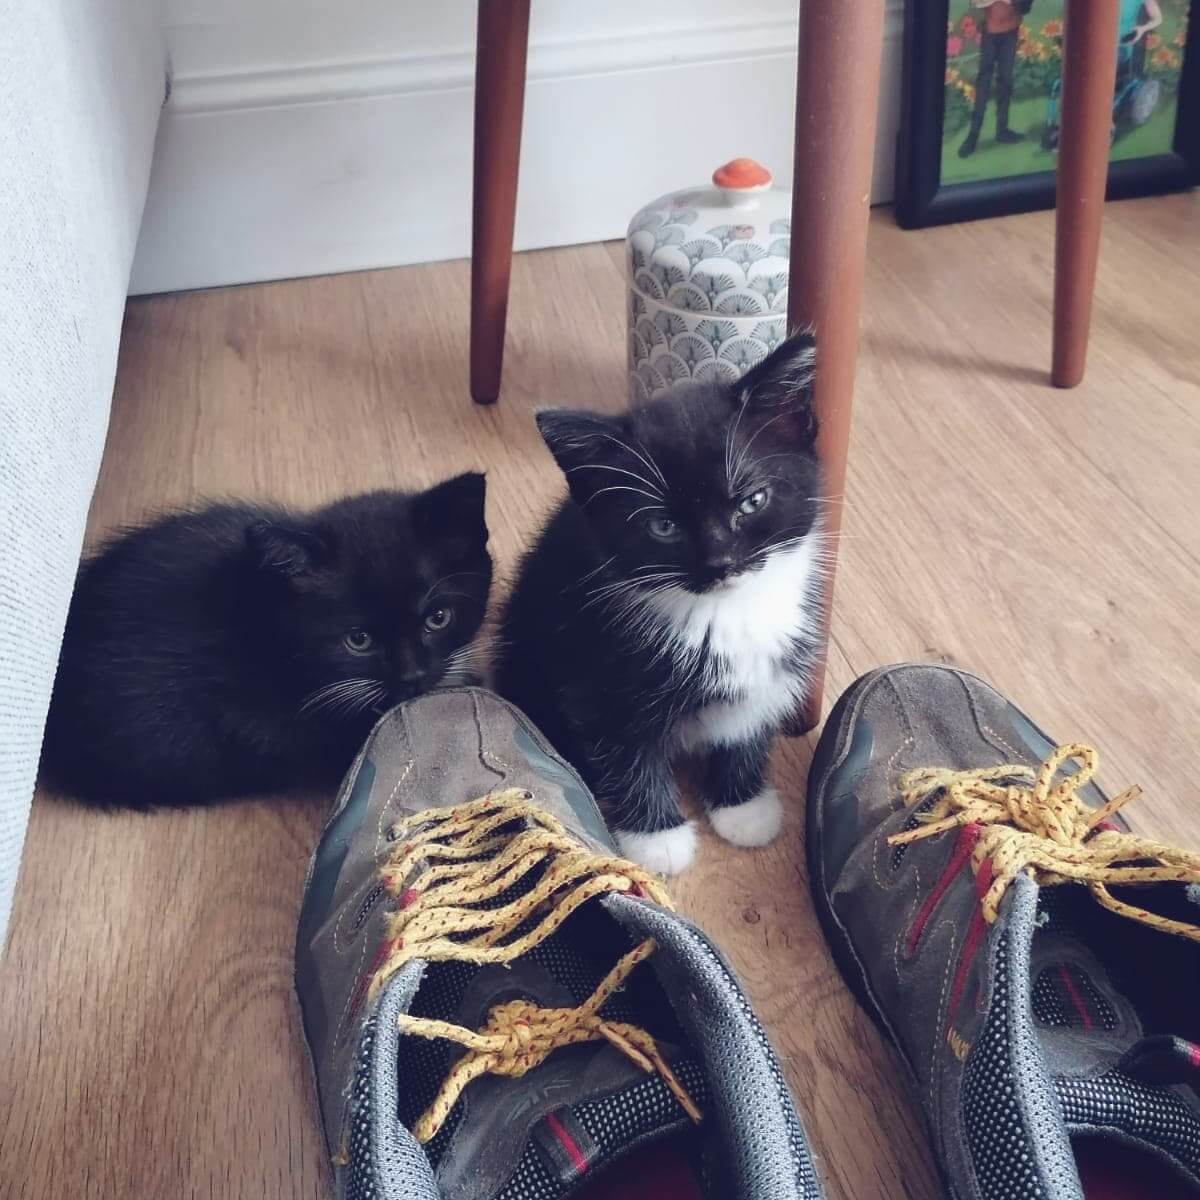 Two tiny black and white tuxedo kittens laying next to mens shoes. The kittens are smaller than the shoes. They are both falling asleep.